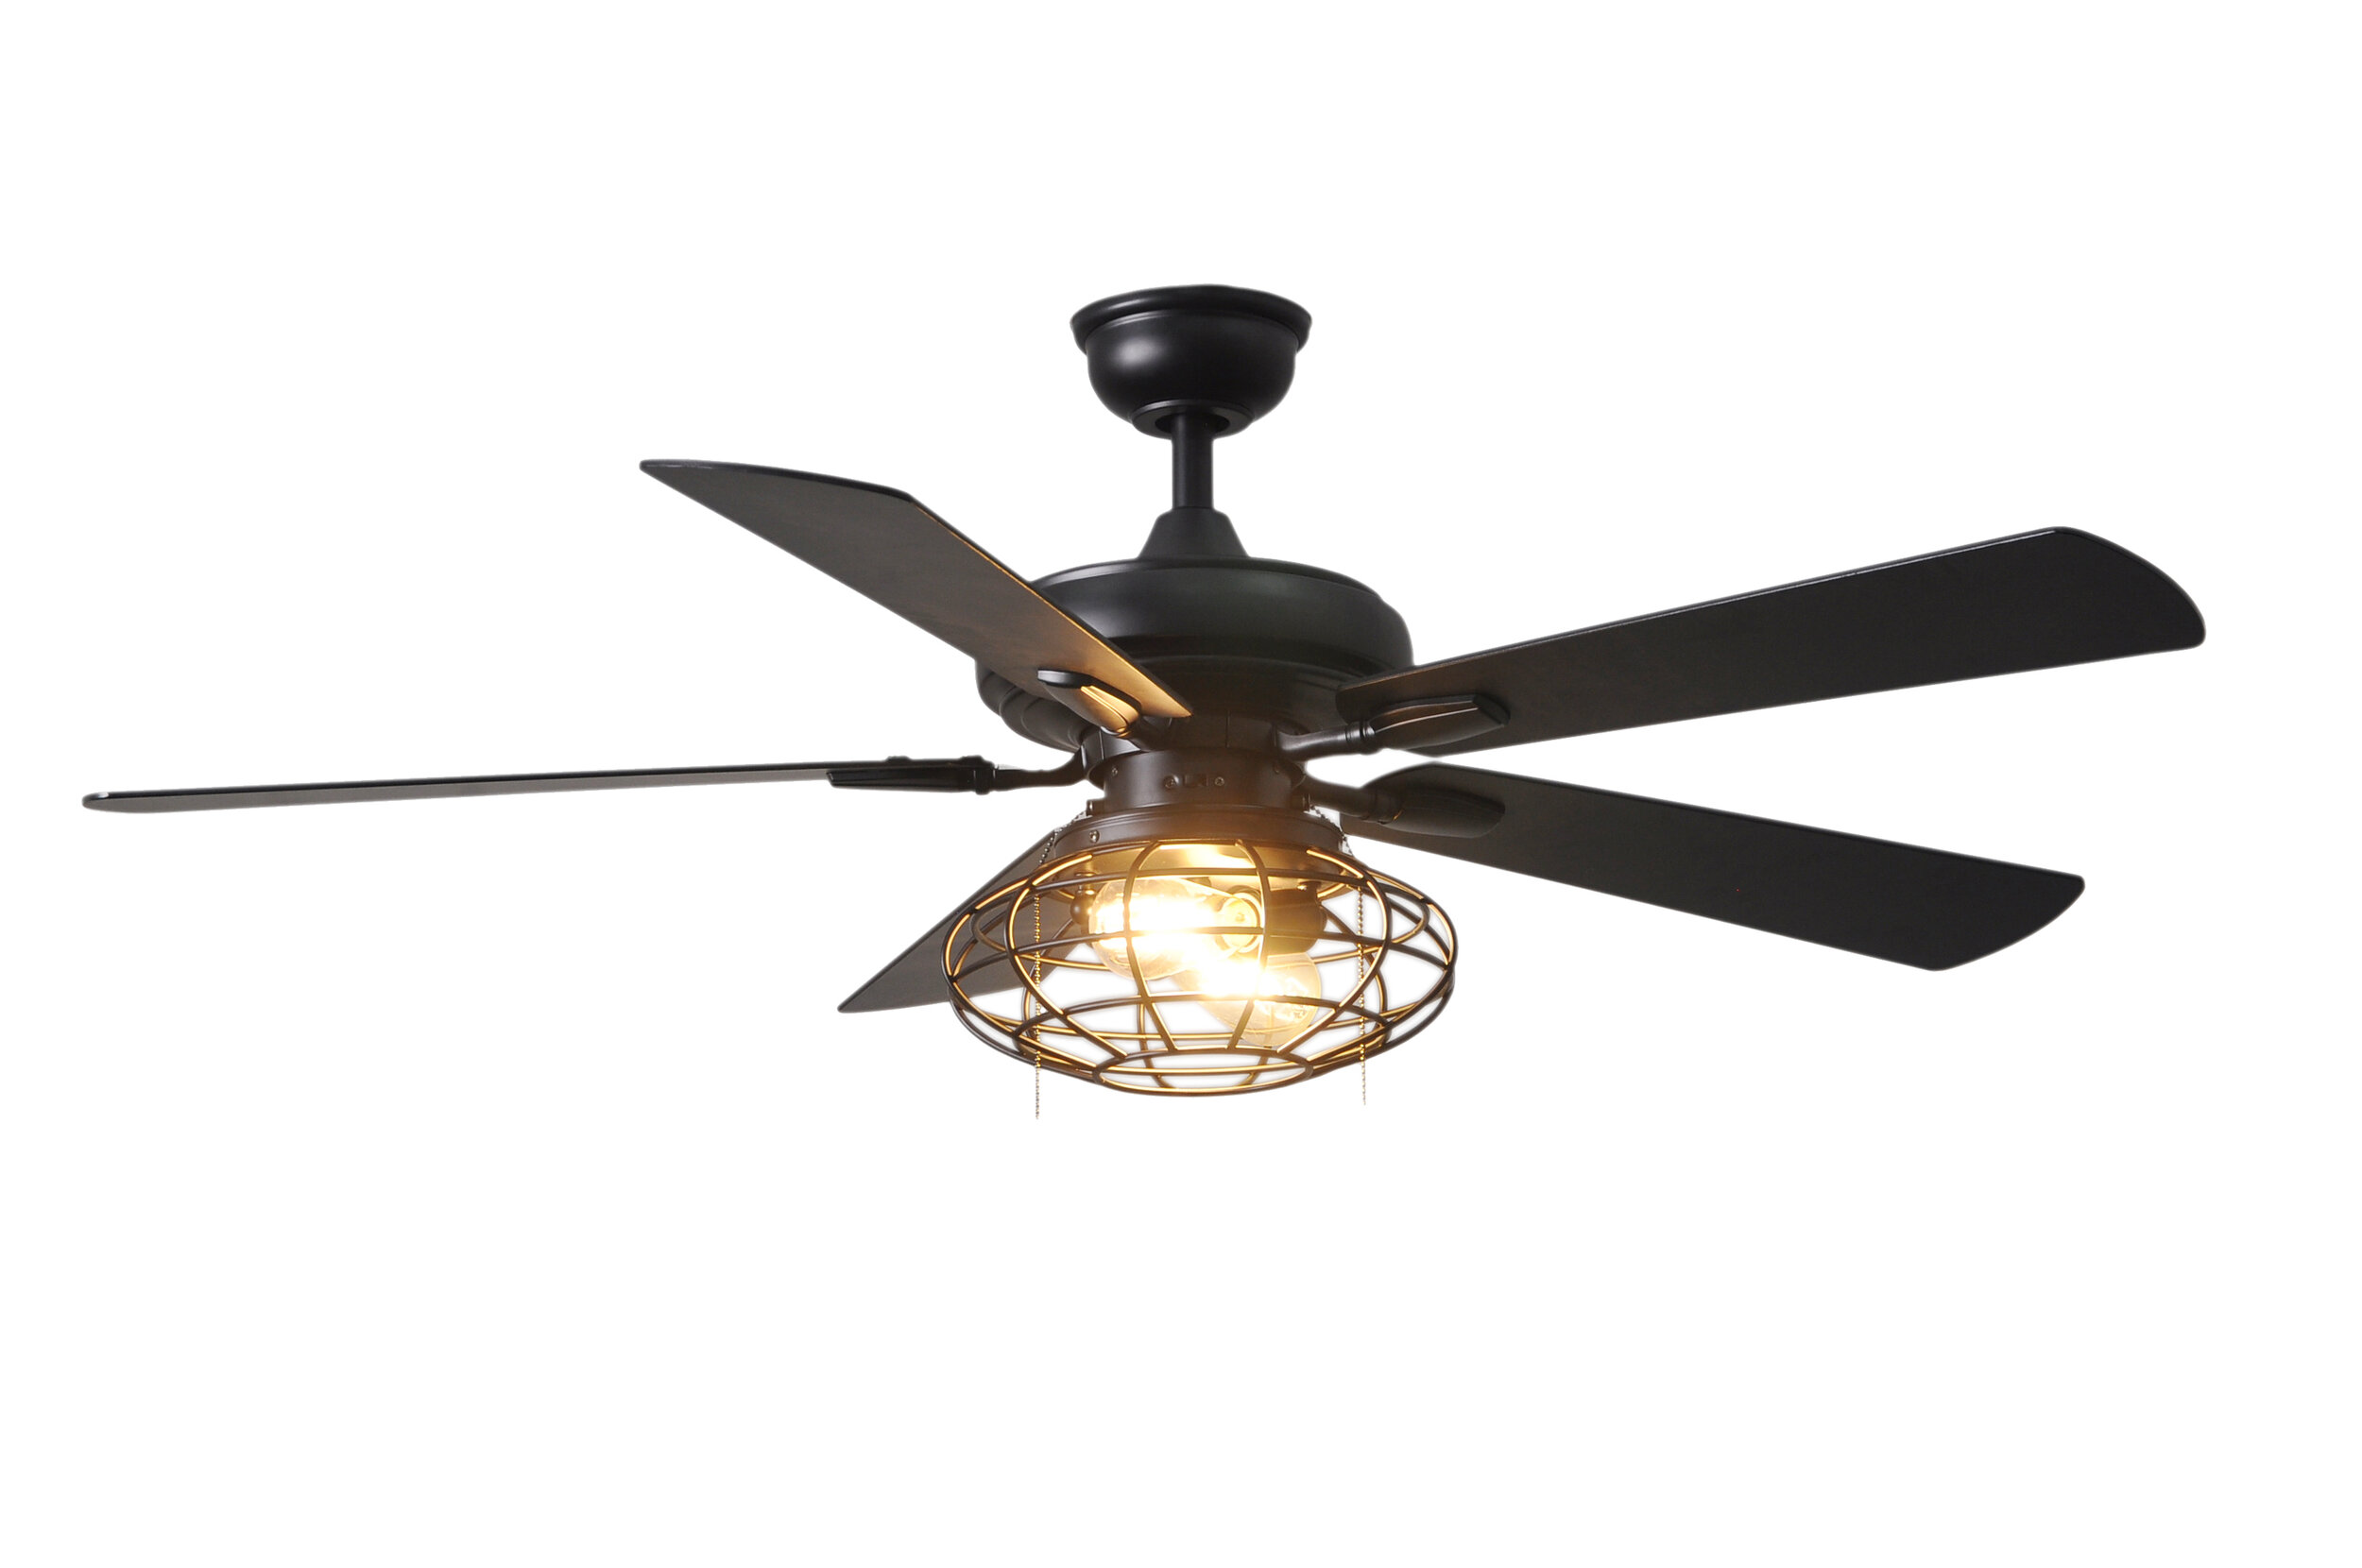 Home Decorators Collection Ellard 52 in LED Indoor Natural Iron Ceiling Fan 